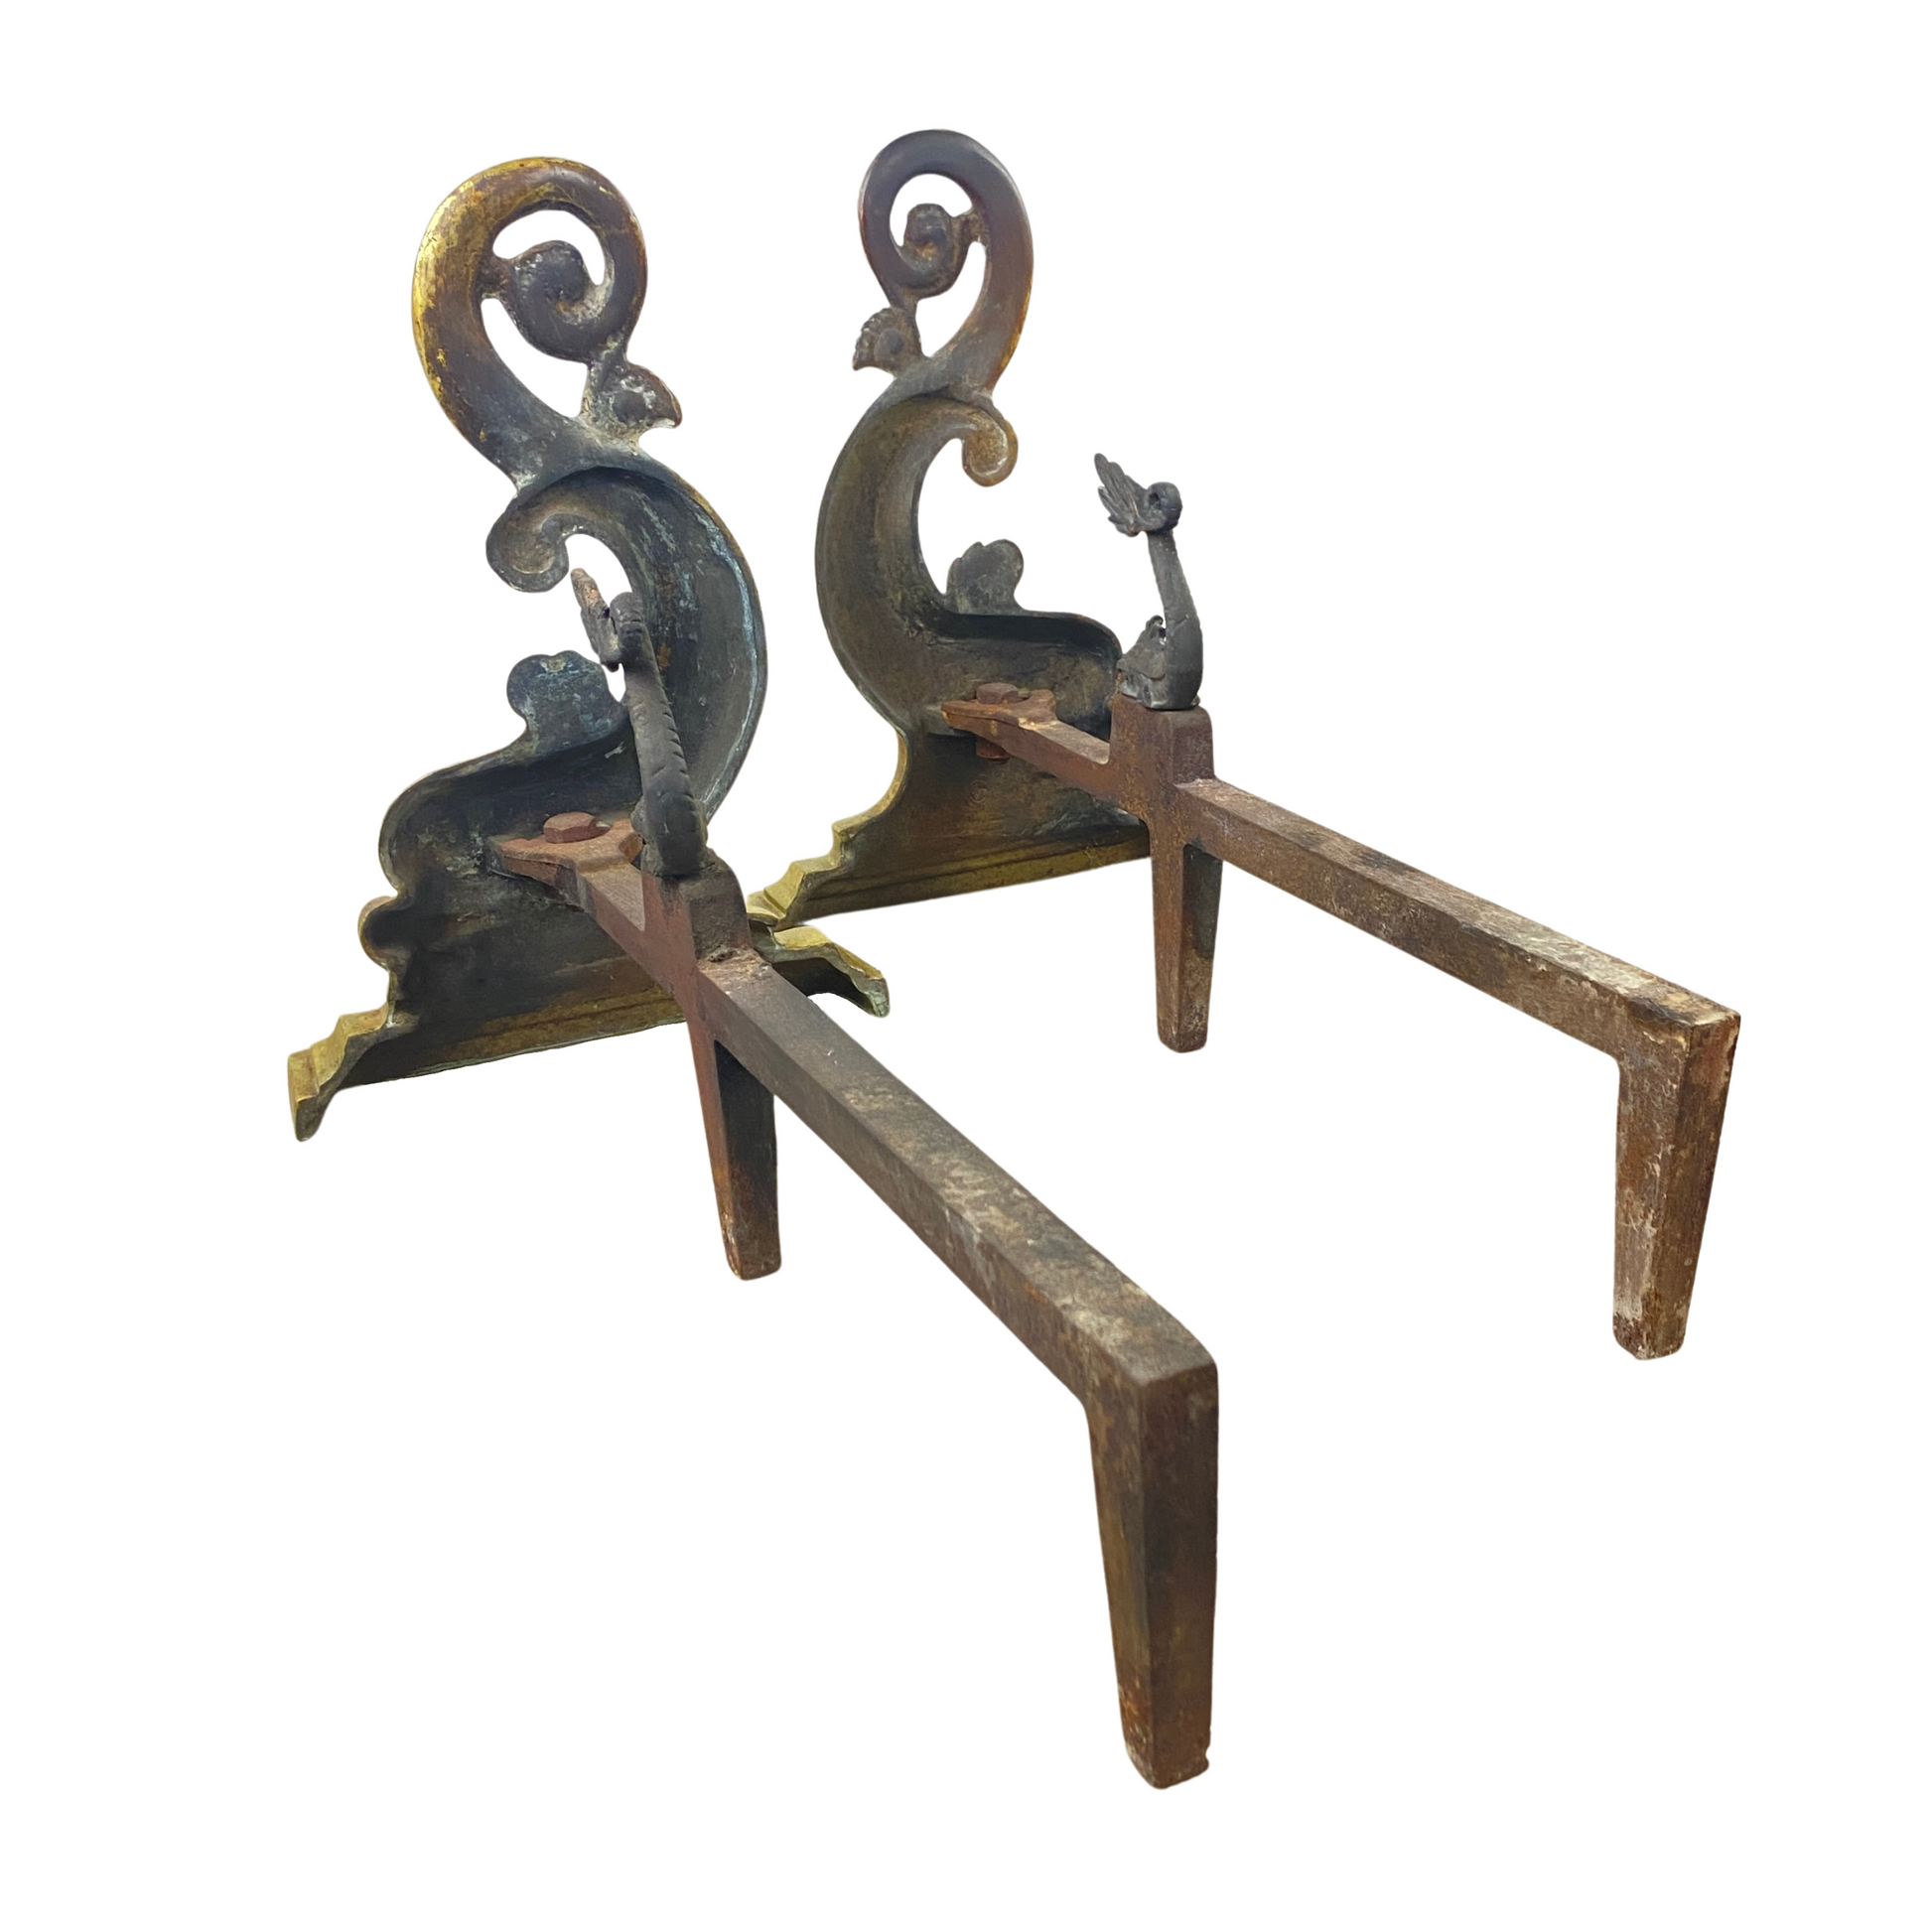 Sold at Auction: HARVIN VIRGINIA METALCRAFTERS CAST IRON & BRASS